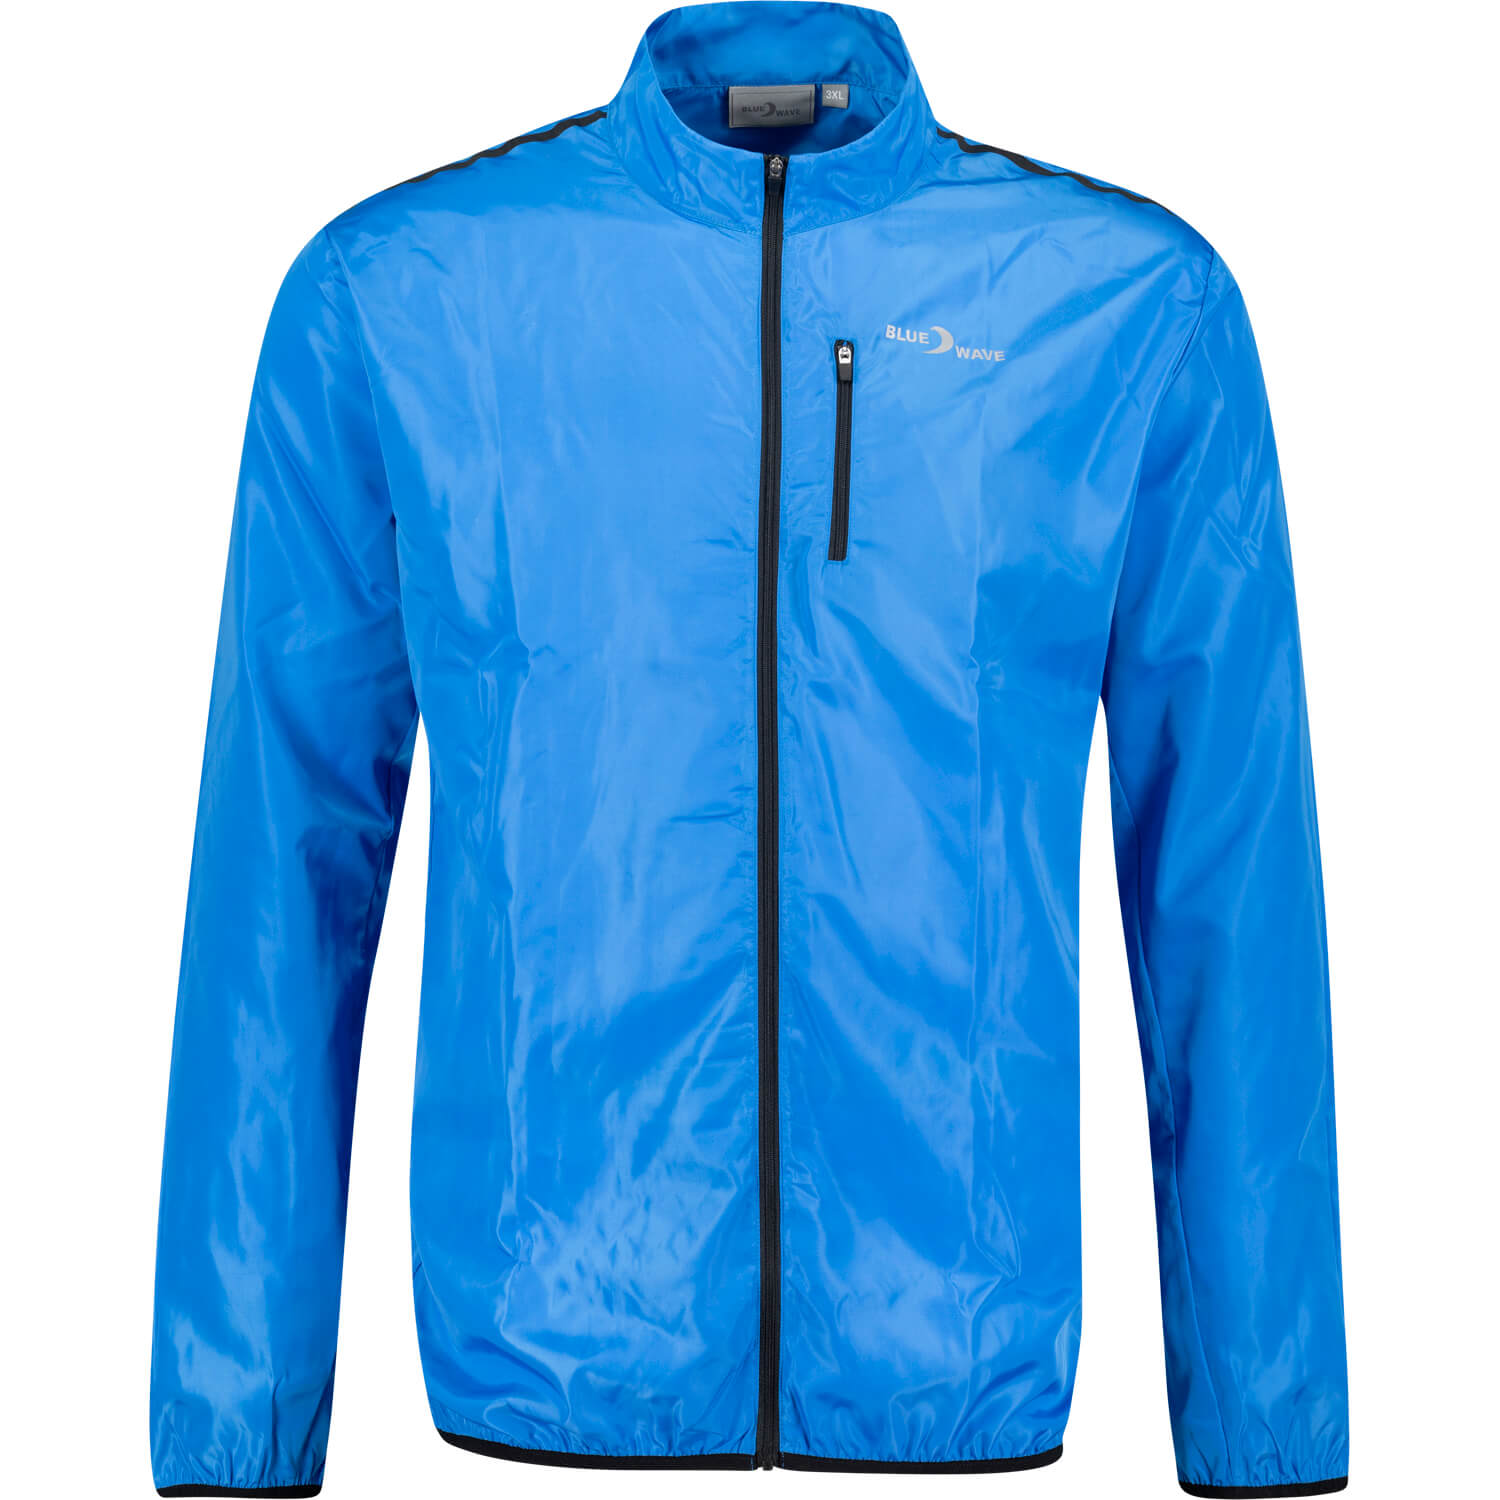 Bike jacket "Anton" in oceanblue by Blue Wave for men up to oversize 10XL